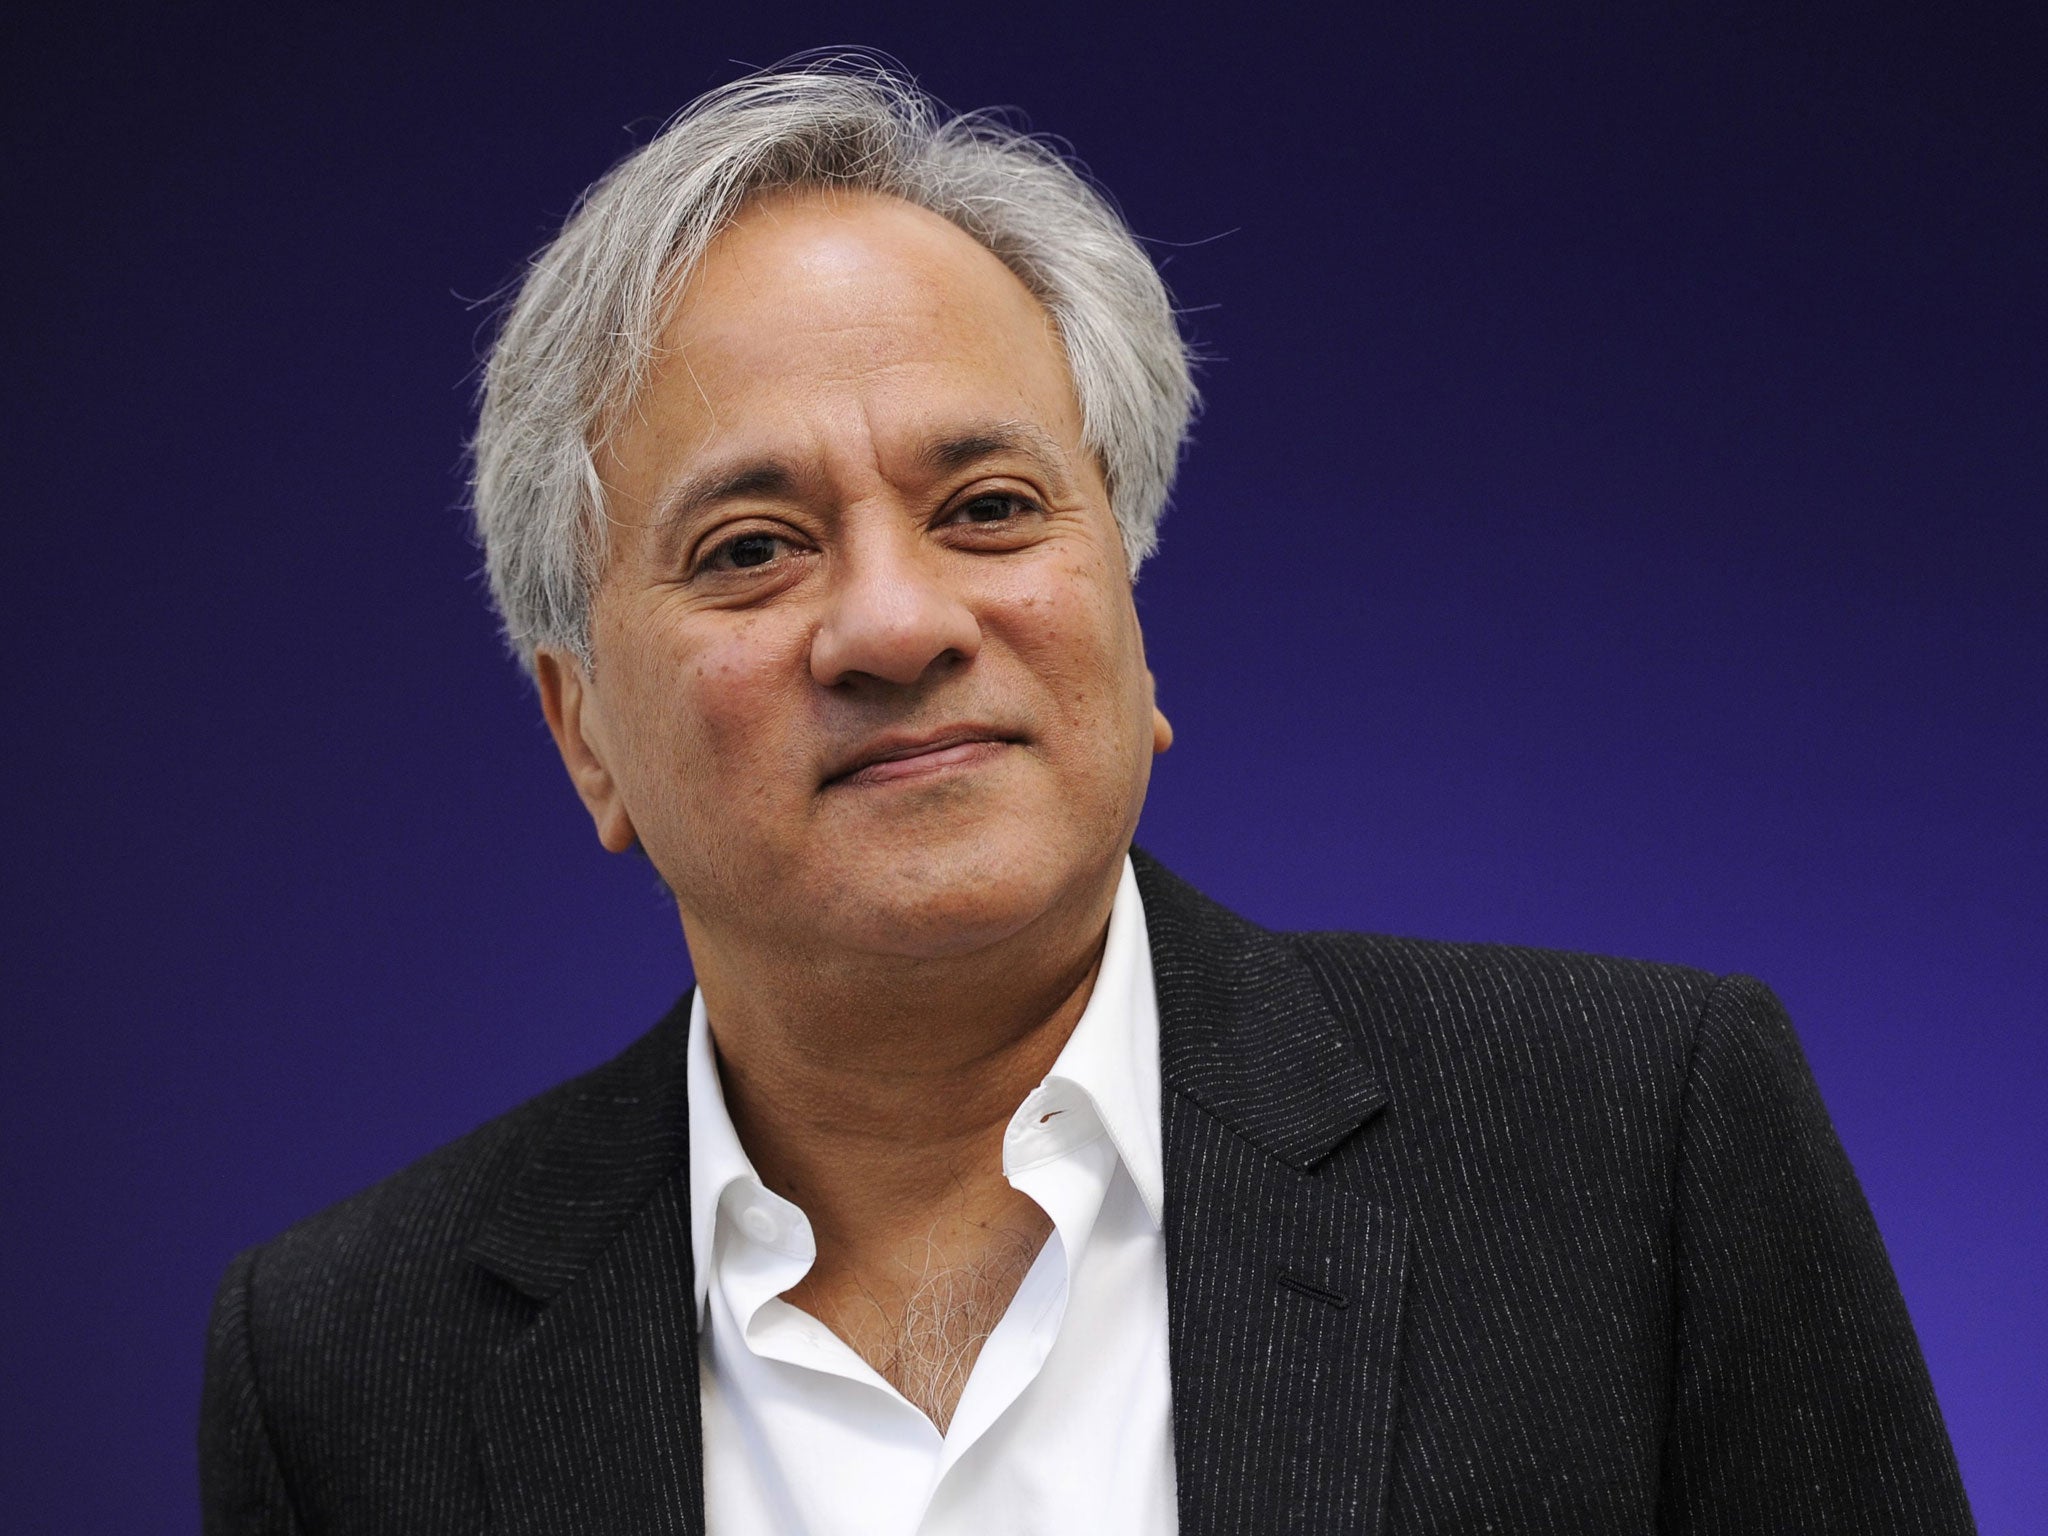 Turner Prize-winning artist Anish Kapoor has urged politicians to withdraw the invitation to controversial Indian politician Narendra Modi to visit the UK and 'take a principled stand'